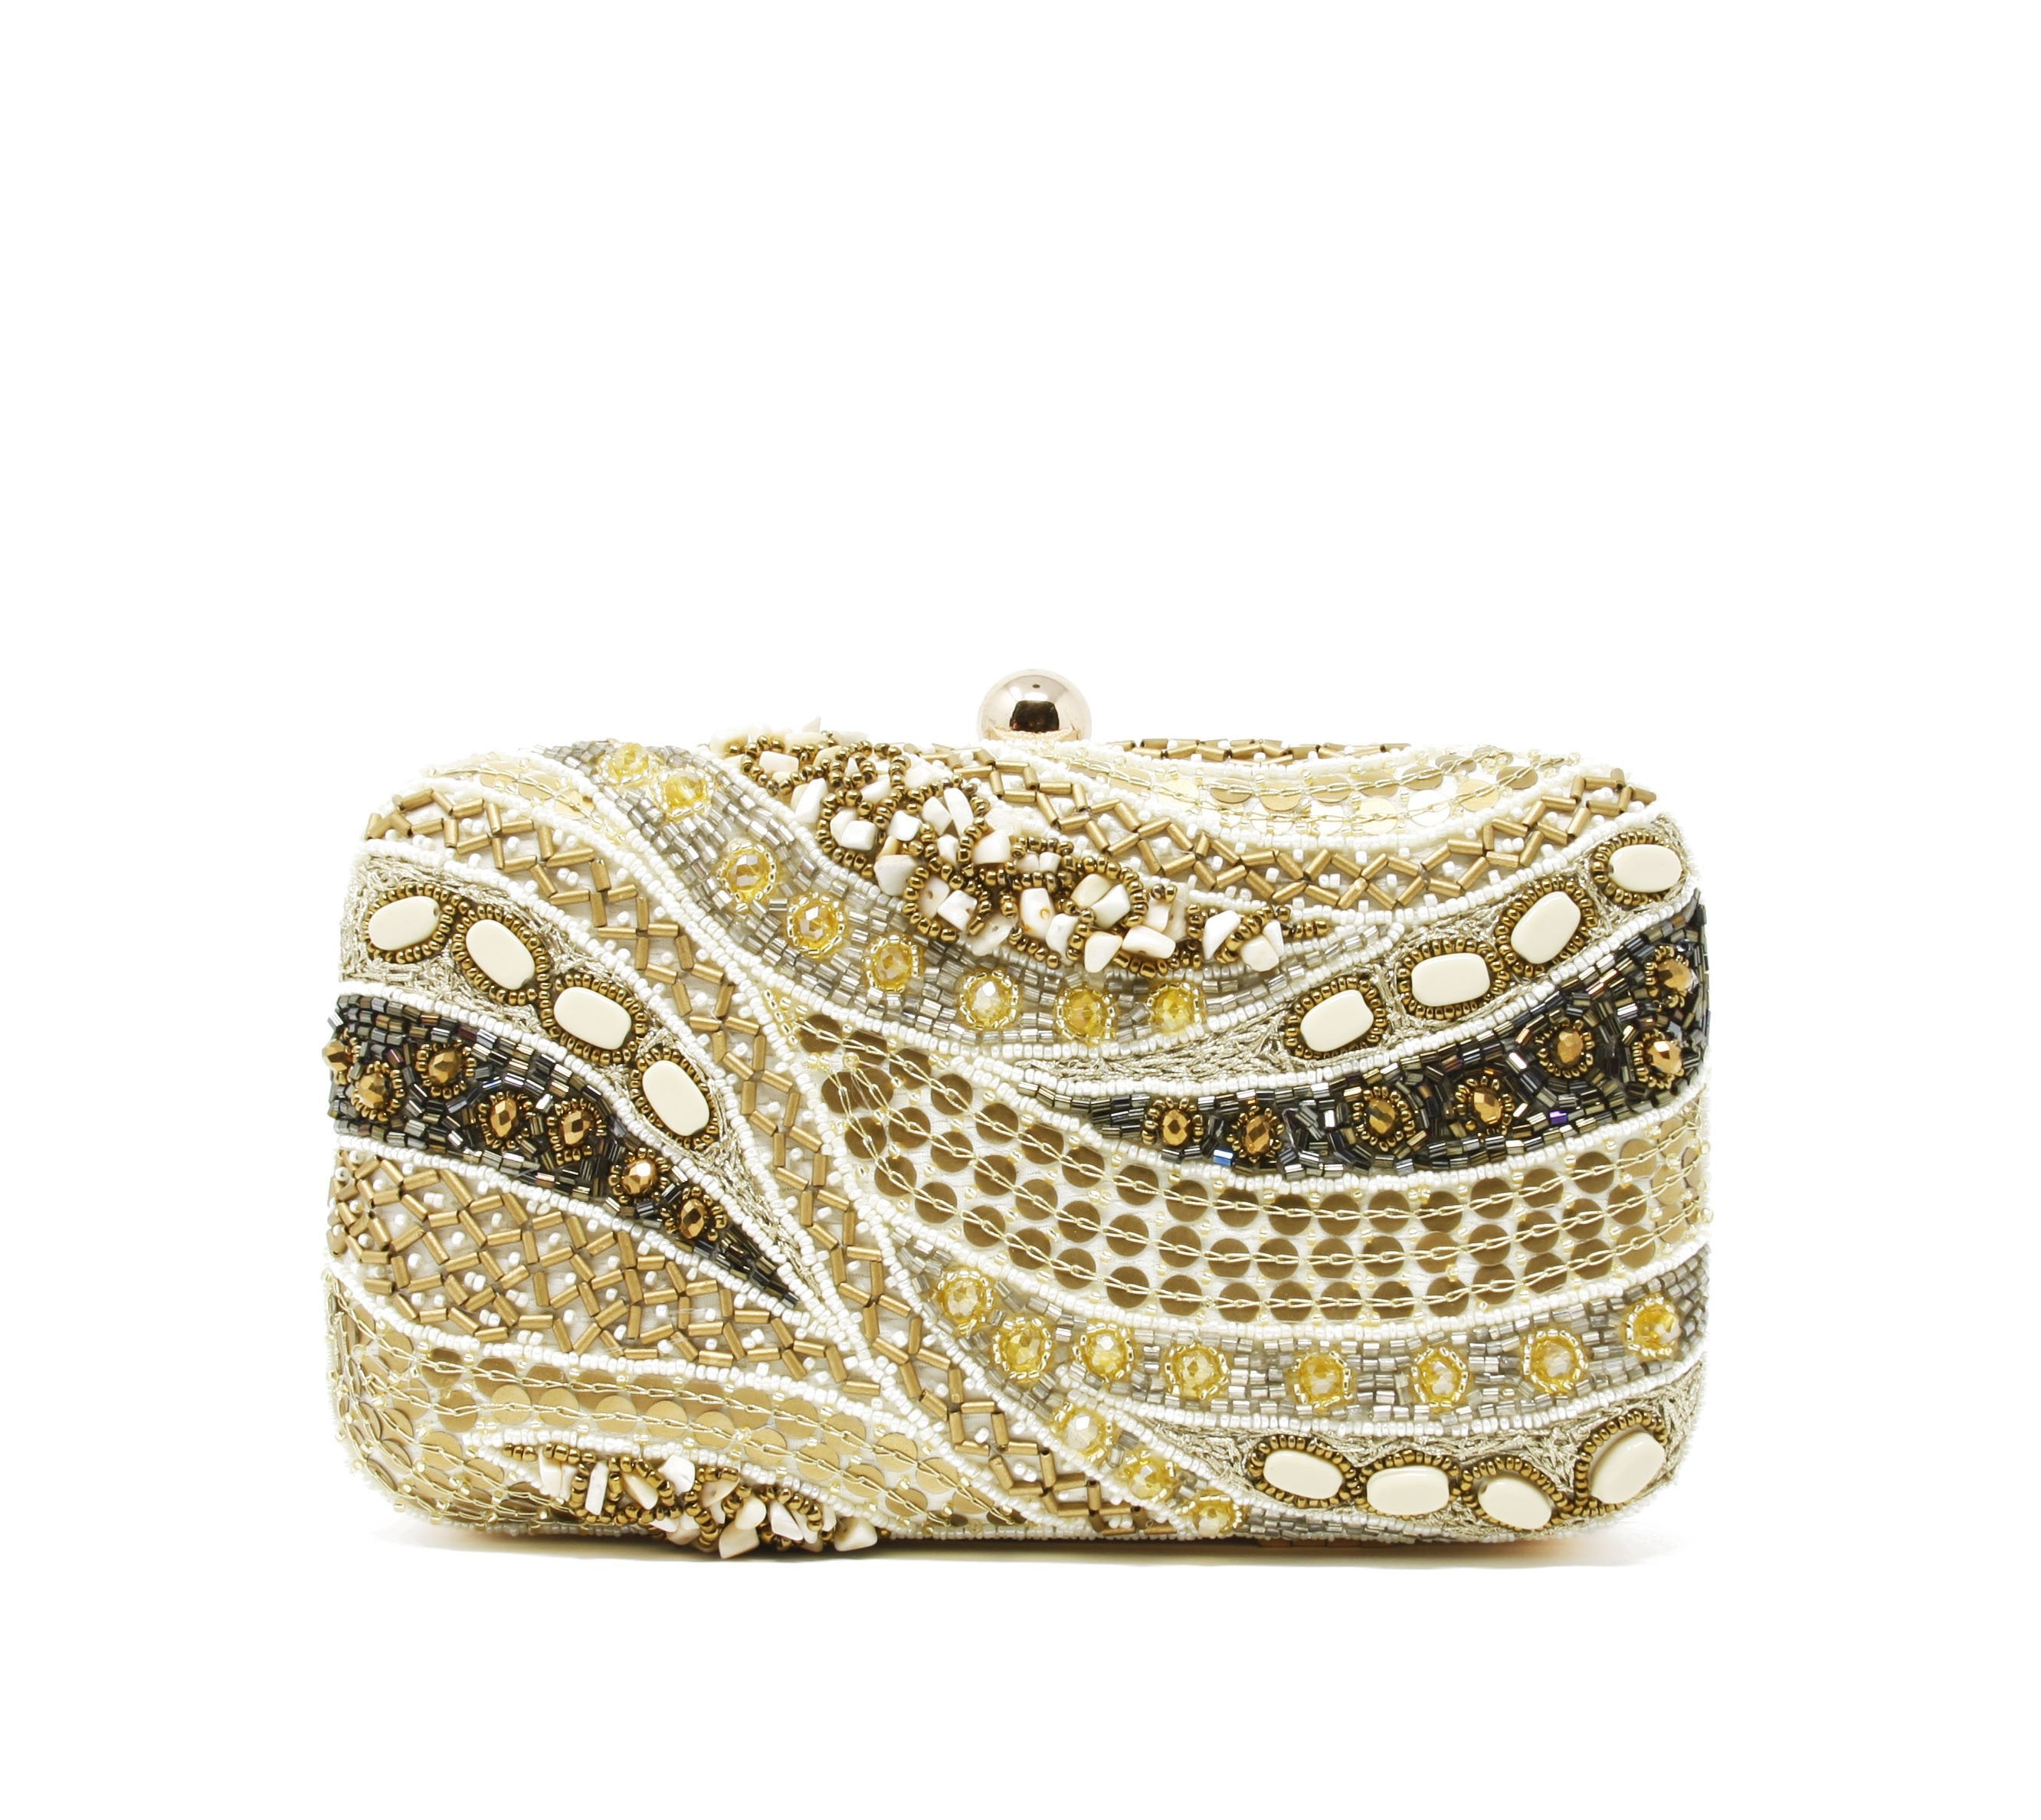 White and Cream Clutch with Heavy embroidery silver, gold, gray, and cream beads, stones, and sequins.